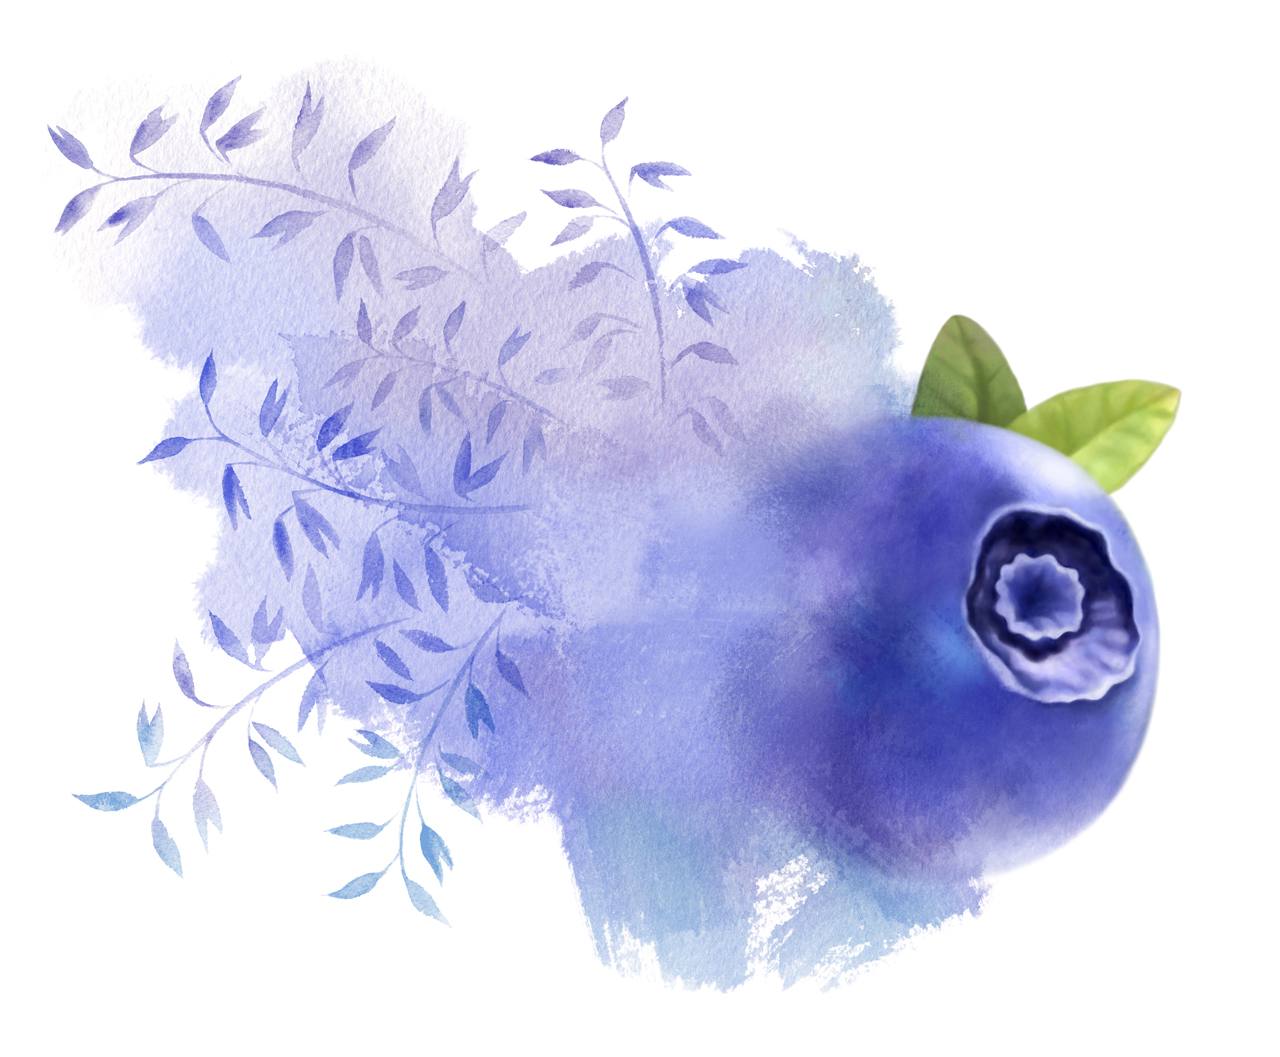 Illustration for a package Great Blueberries